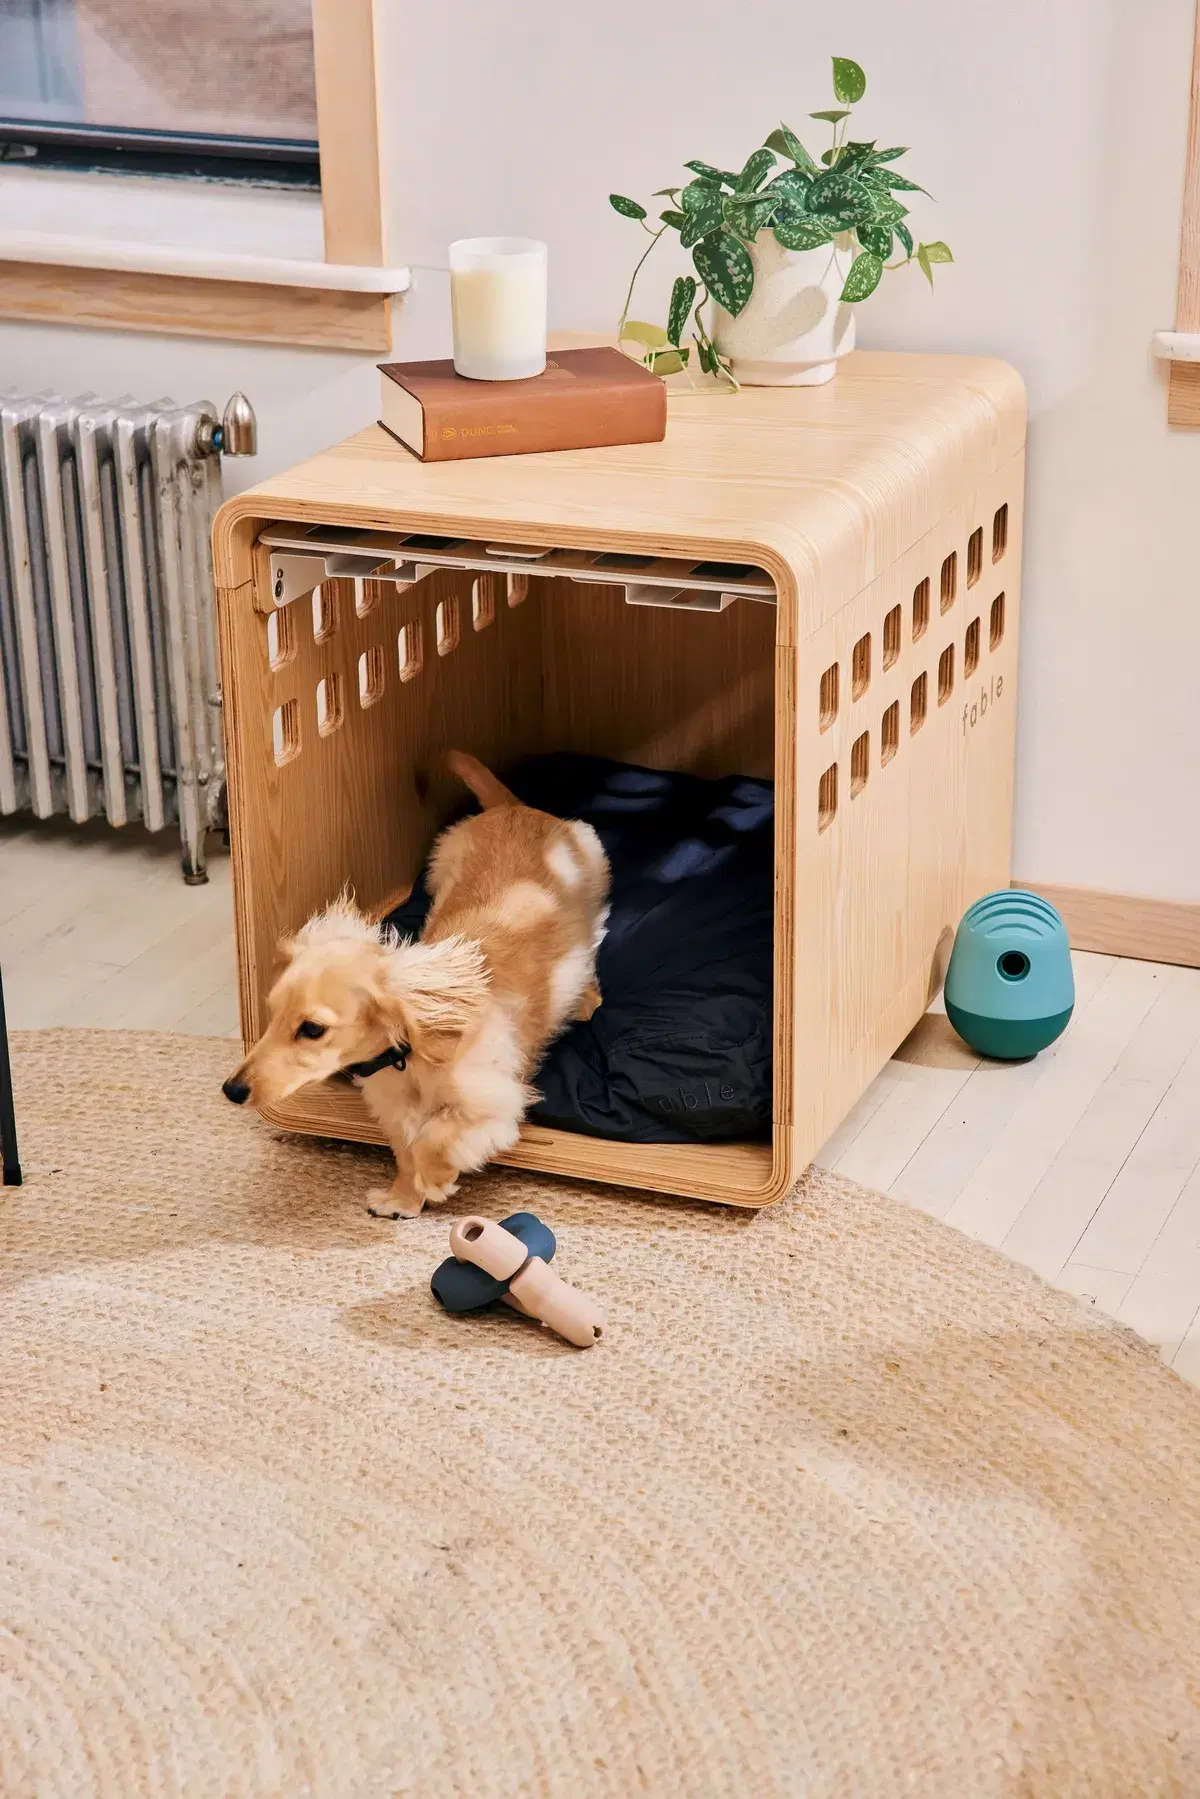 A small dog is exiting a wooden pet crate.